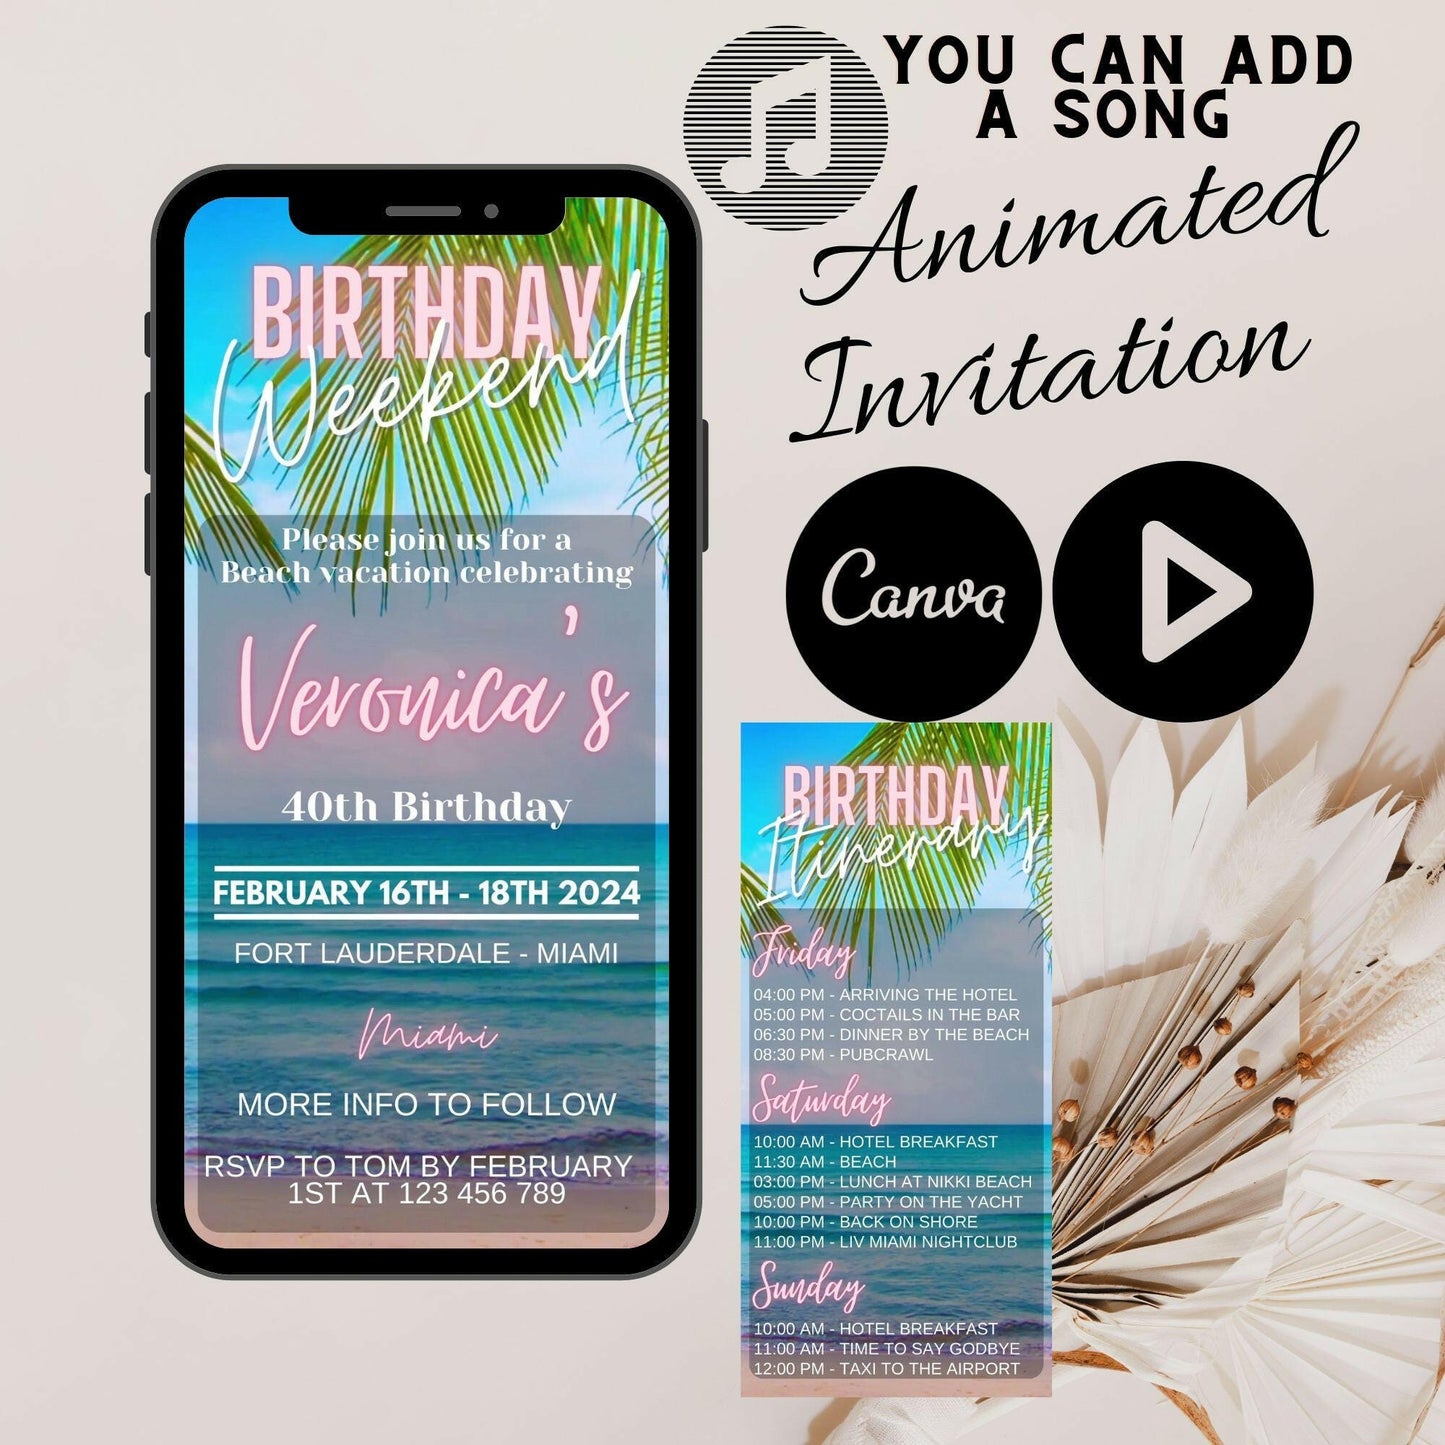 The invitation and itinerary for a beach weekend celebration for her, It includes a video invite and detailed itinerary, Birthday Weekend